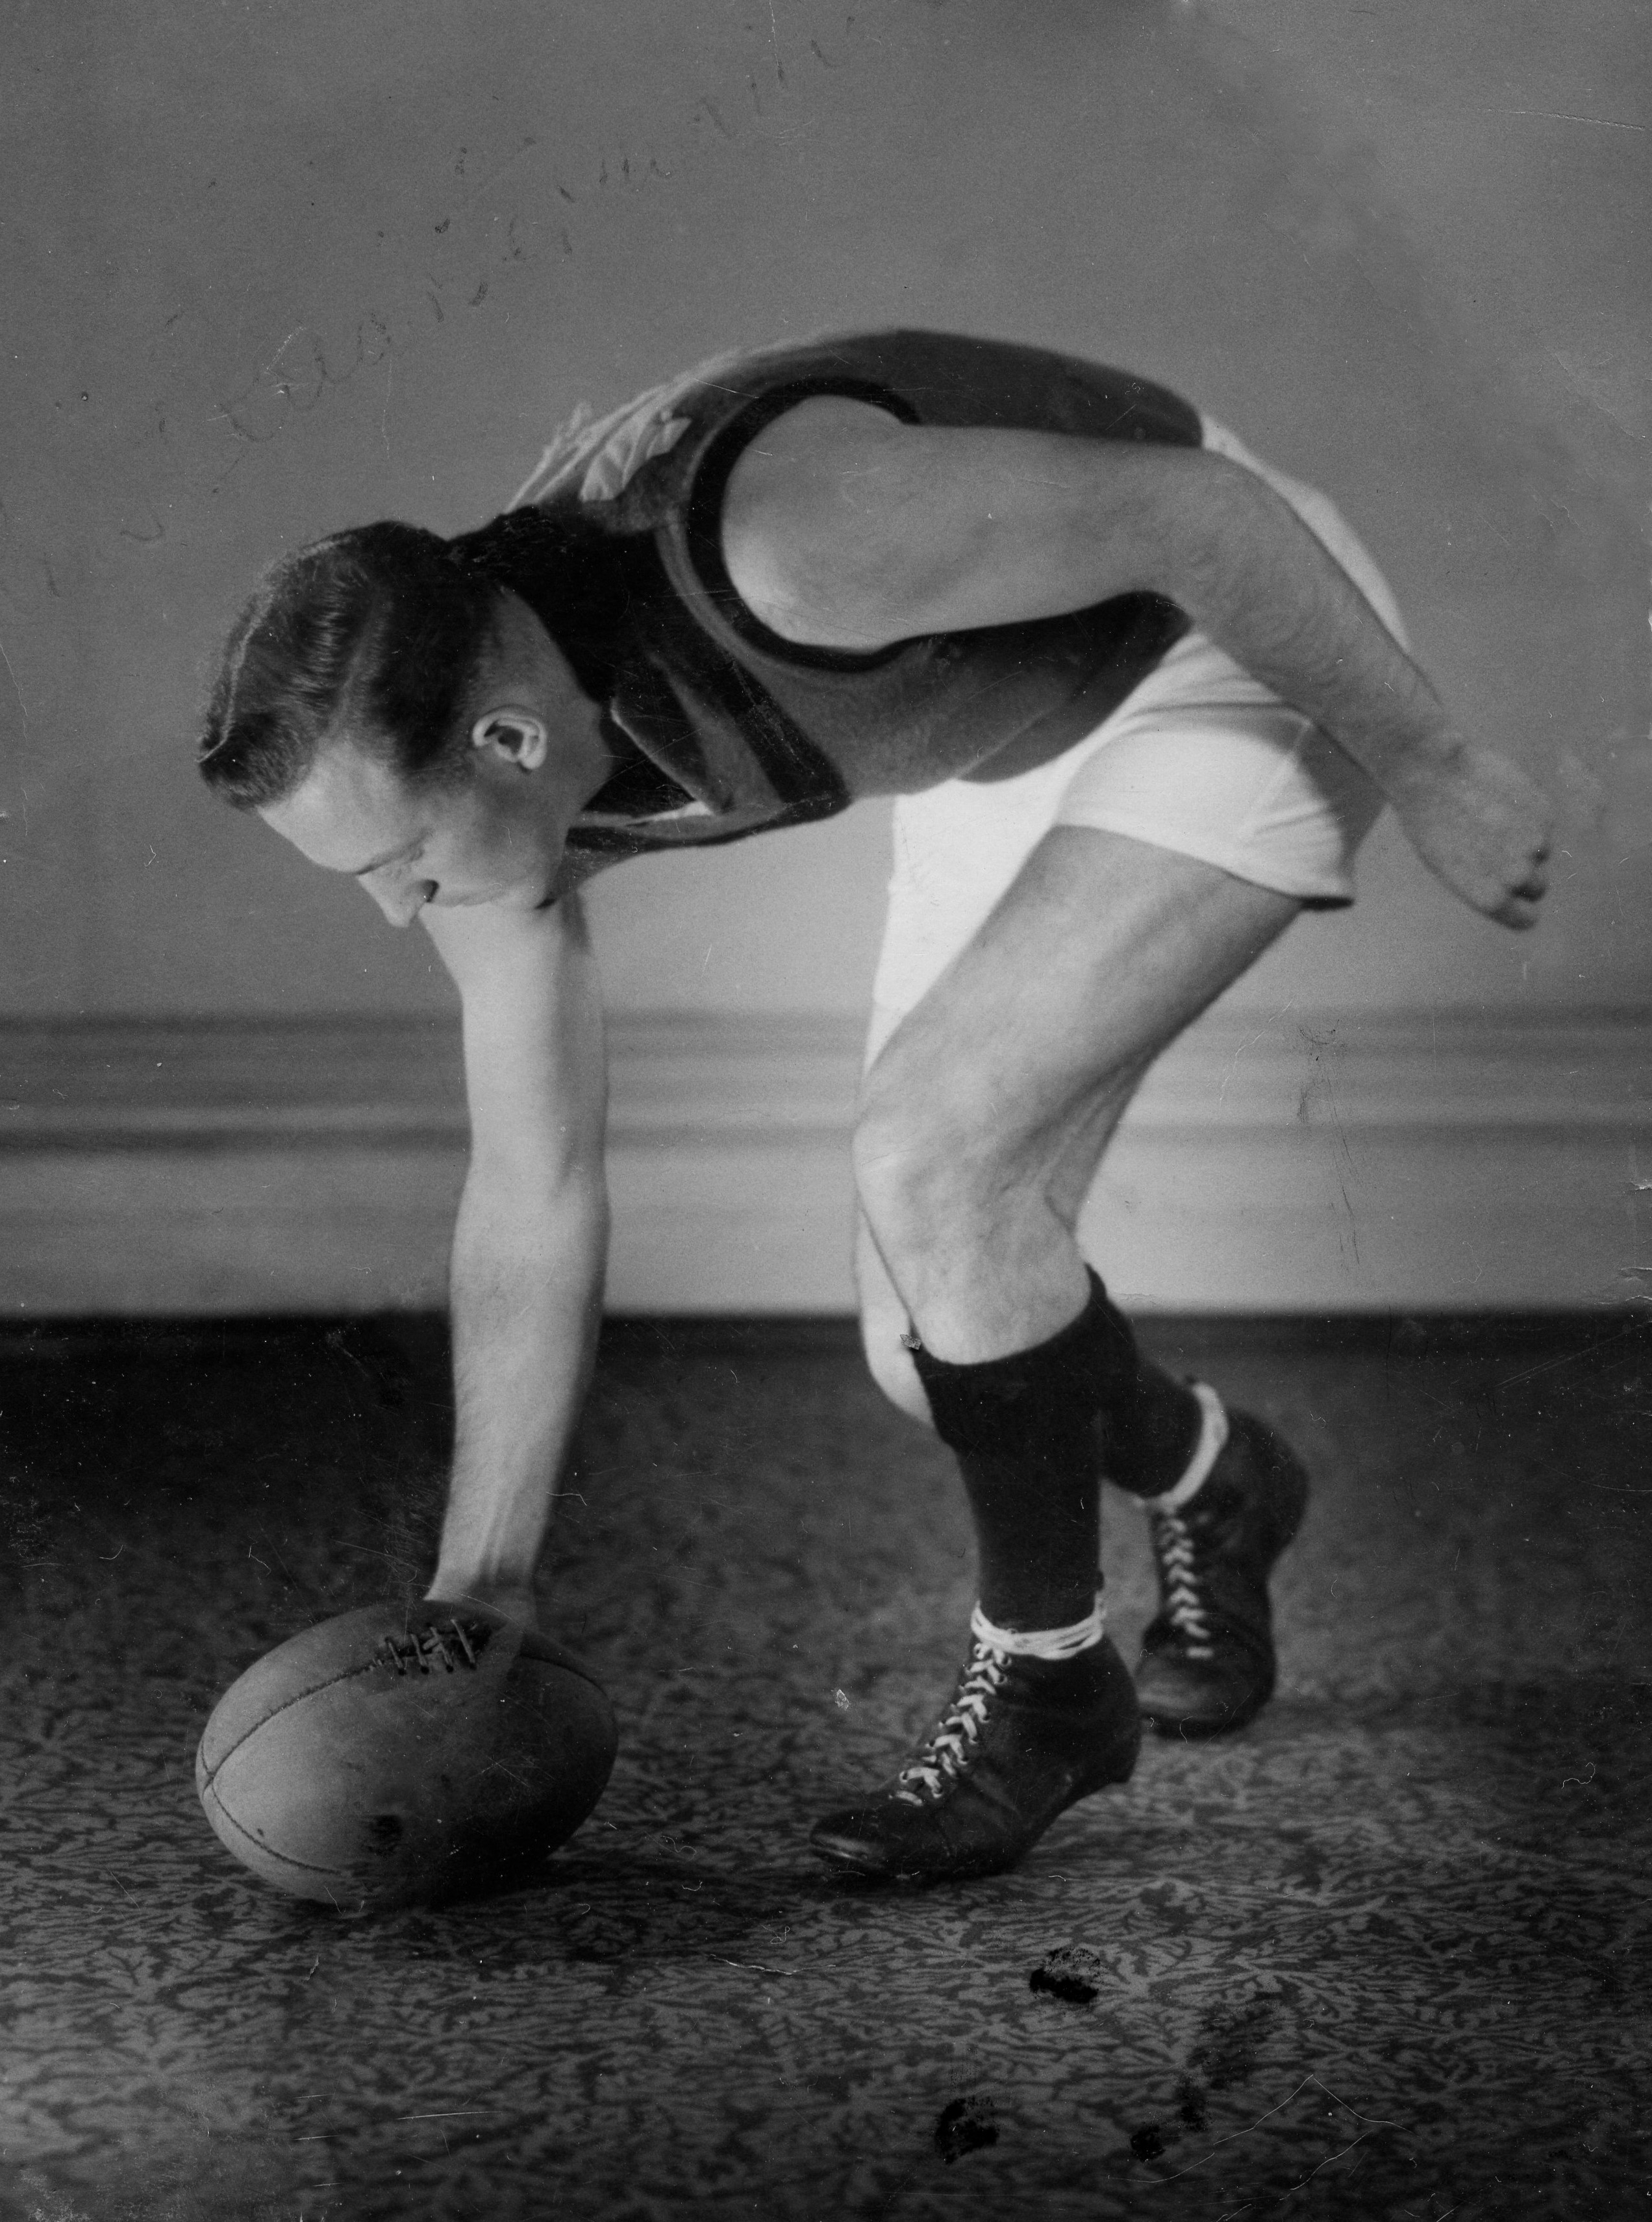 Ronald Quartermaine played 75 games for East Perth (The Royals) in the WAFL from 1948 to 1953 for one pound five per match. 